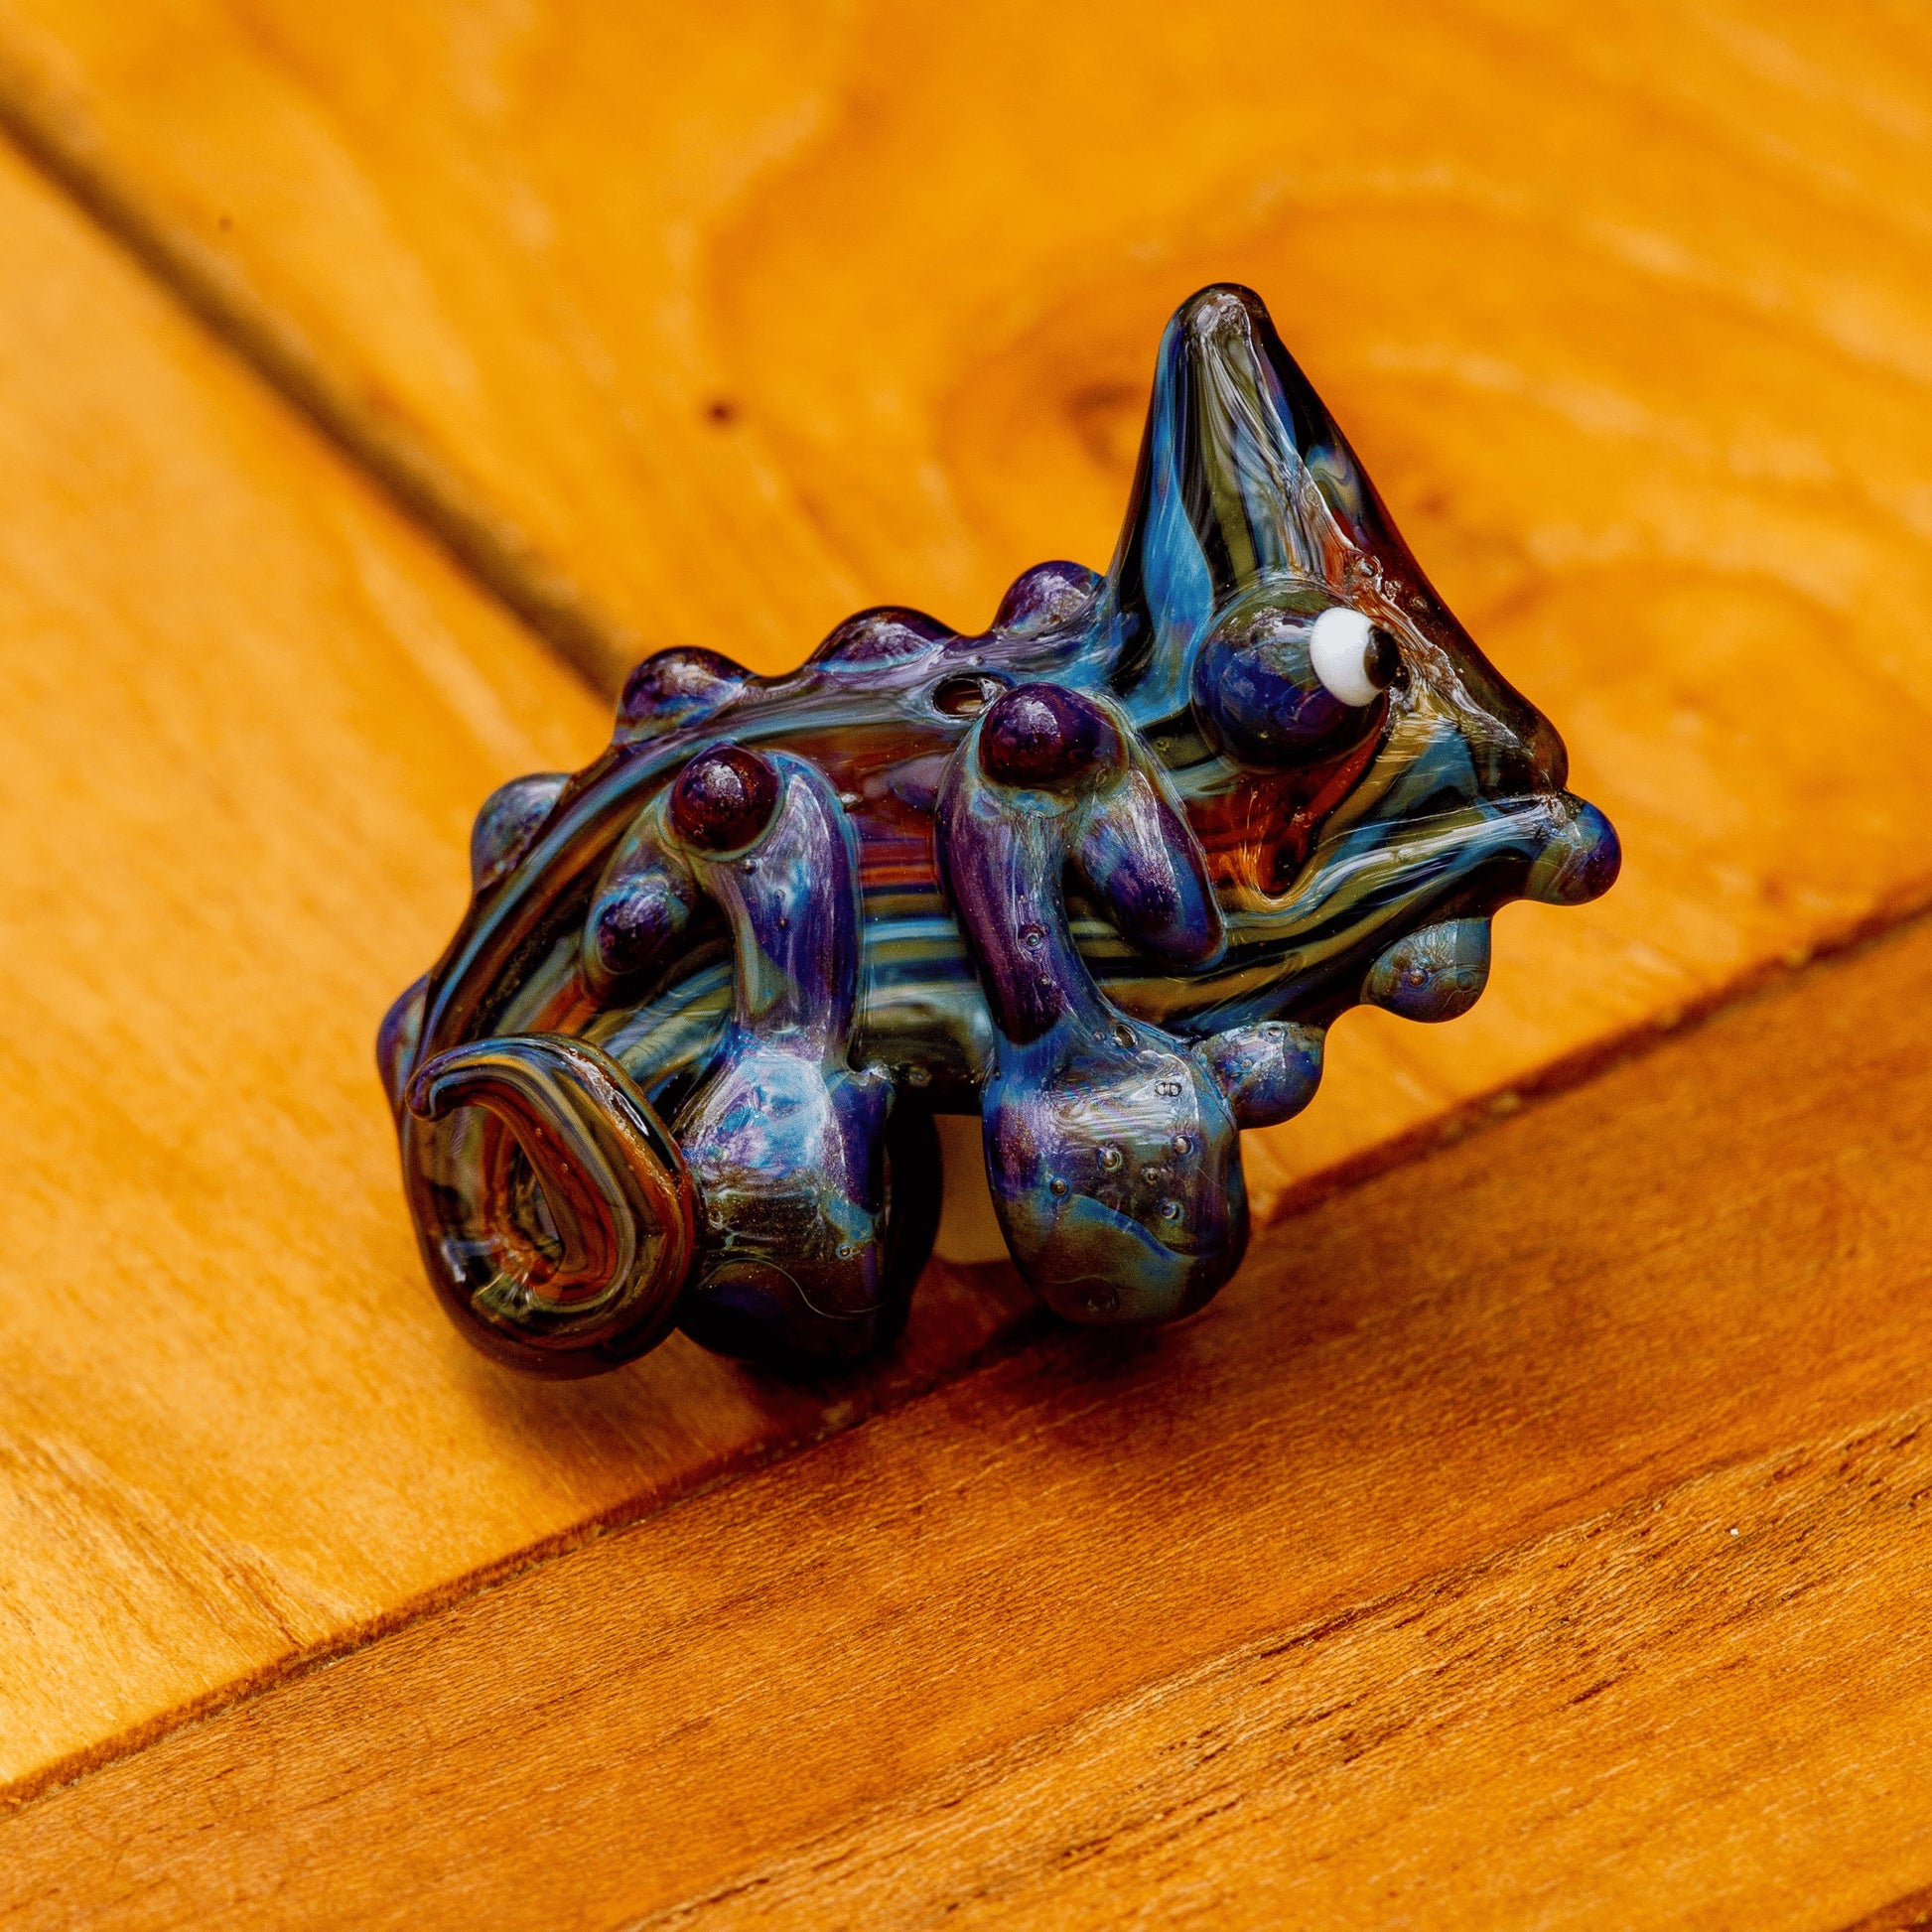 exquisite glass pendant - Chameleon Pendant (K) by Willy That Glass Guy